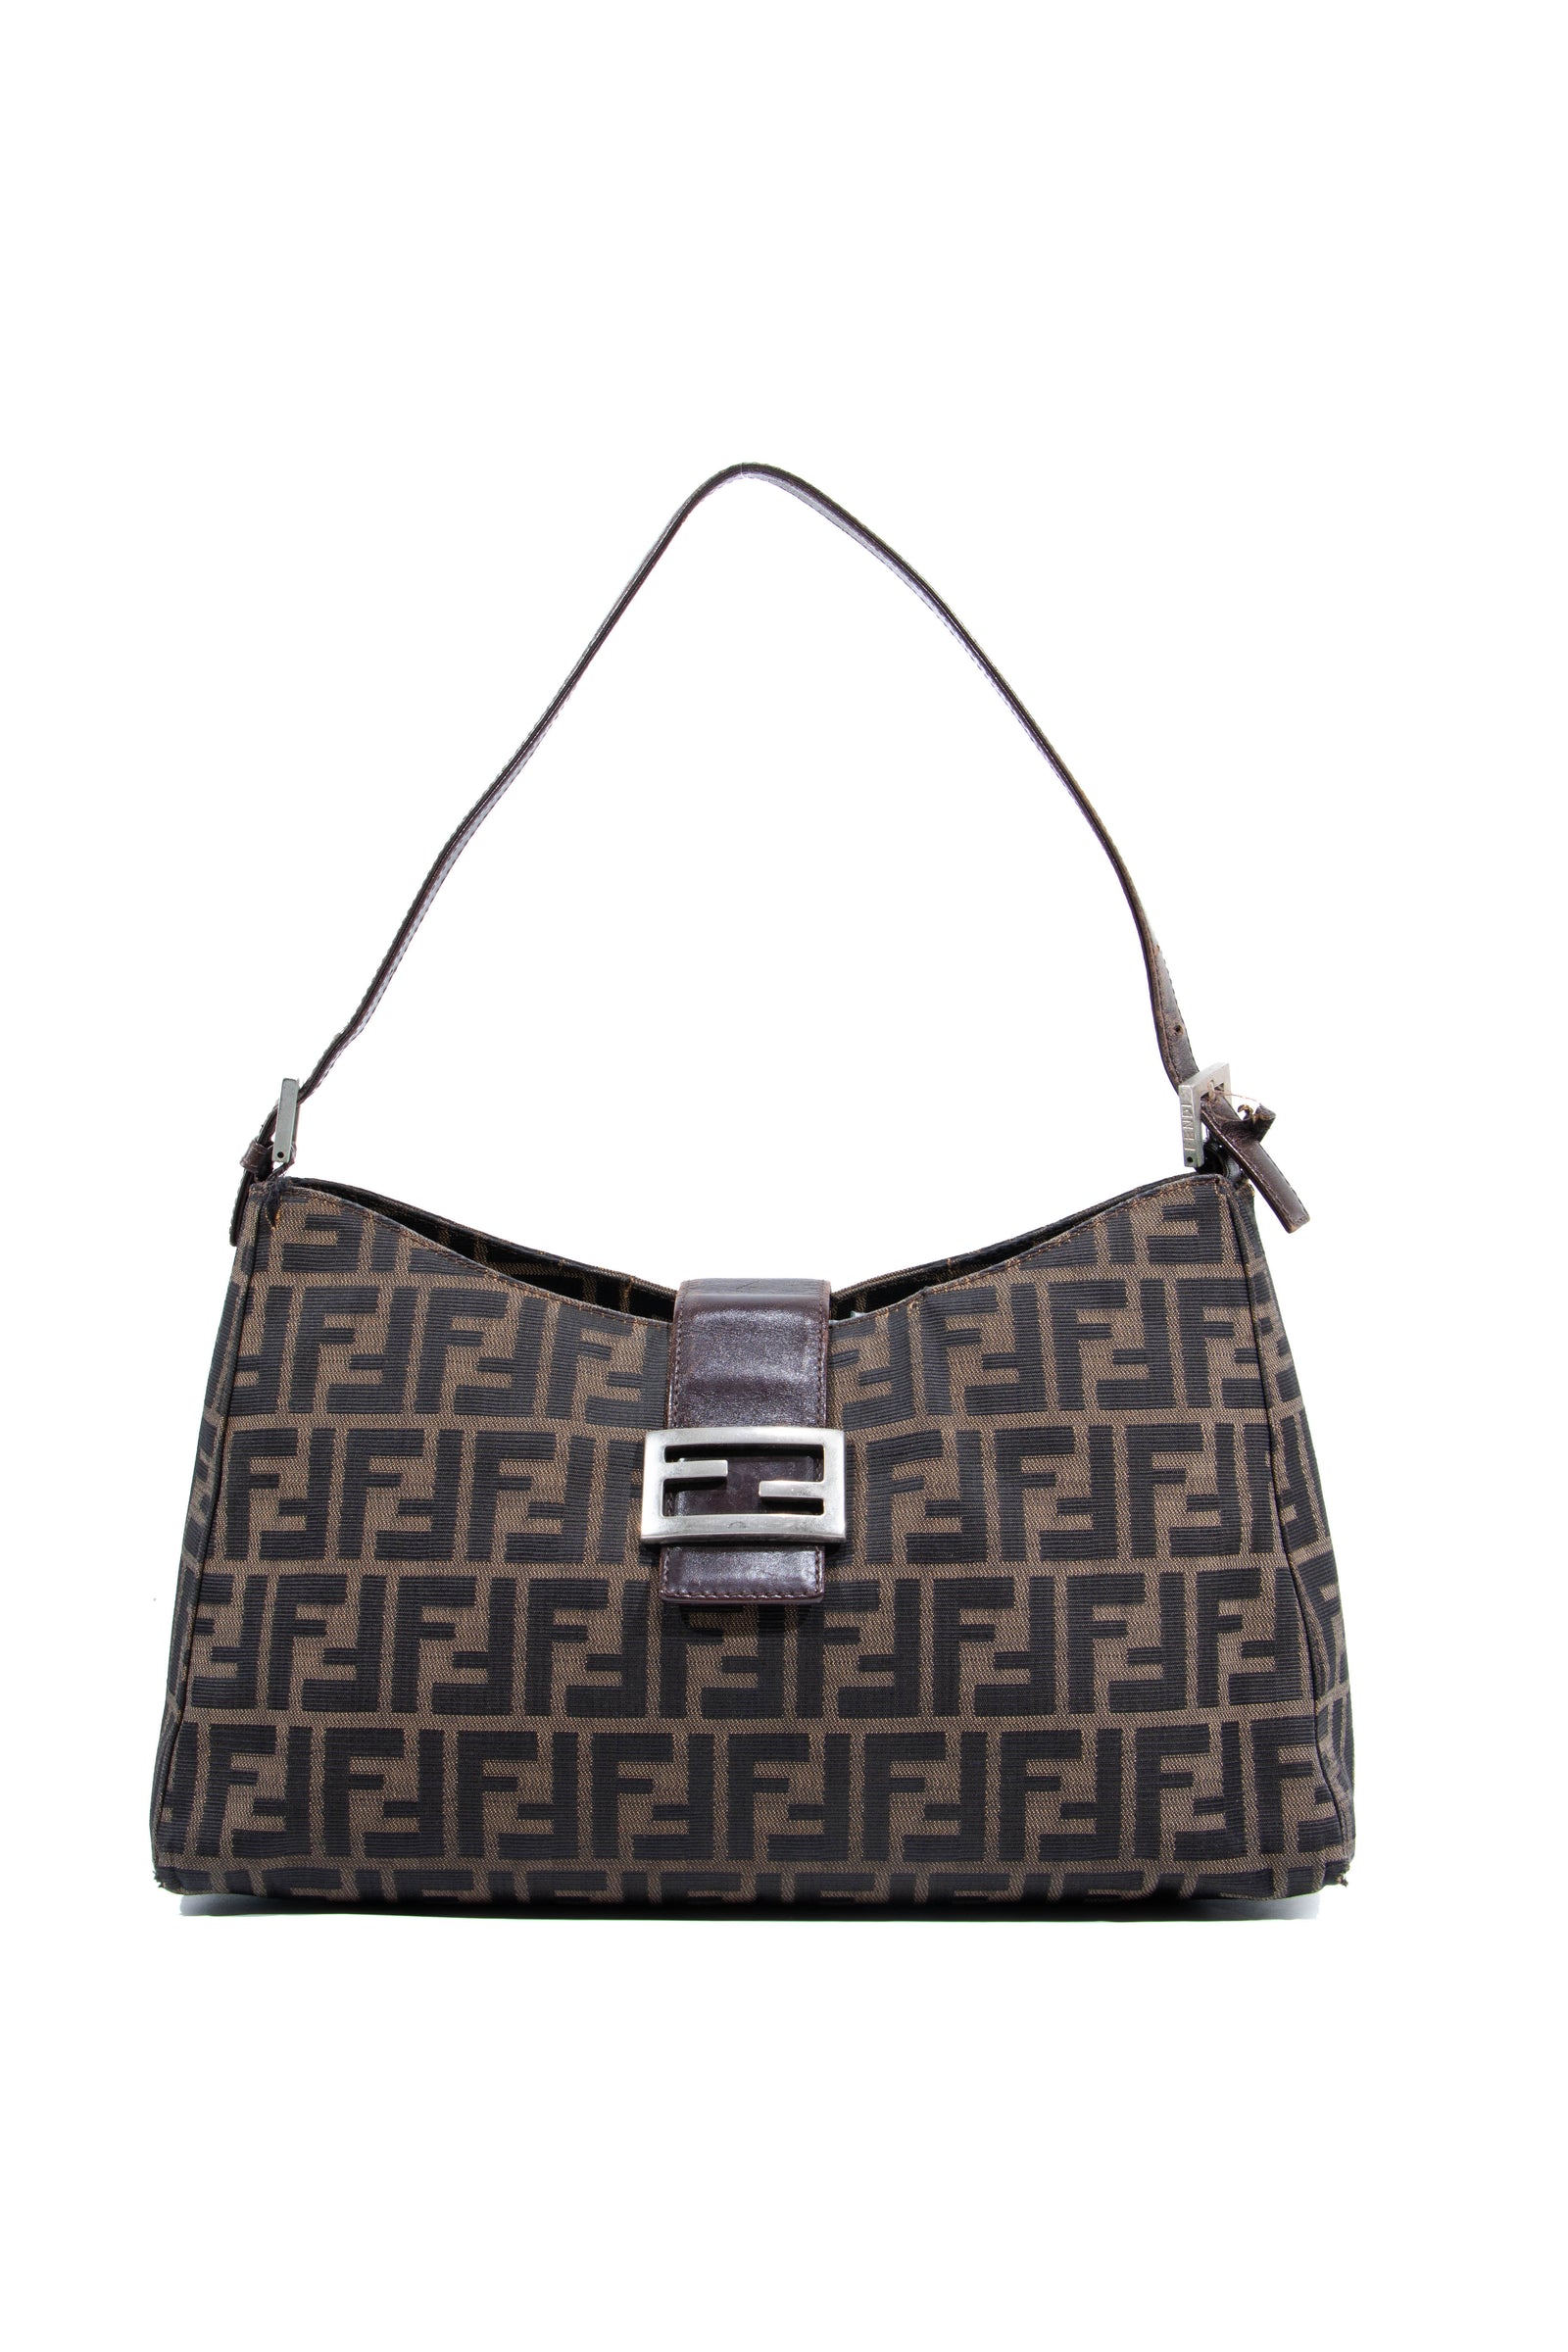 Vintage Fendi bag with the iconic Fendi pattern and whit…